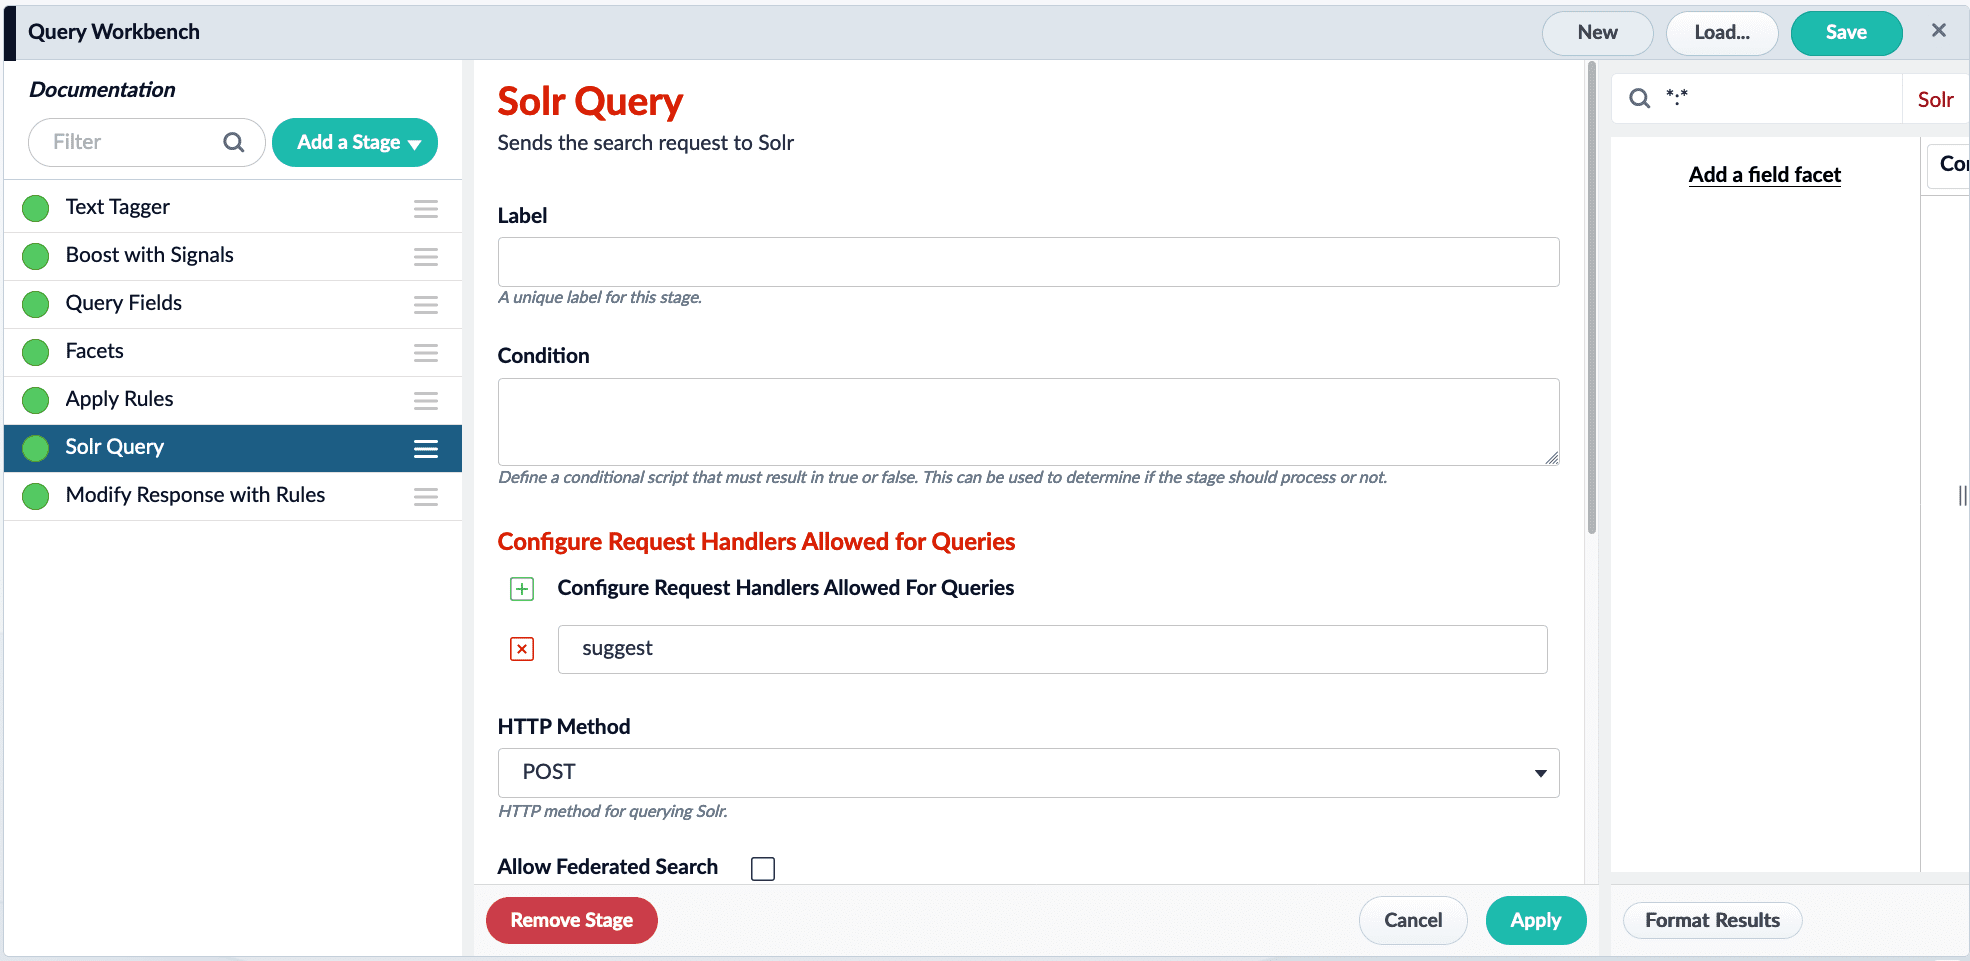 Solr Query stage request handlers